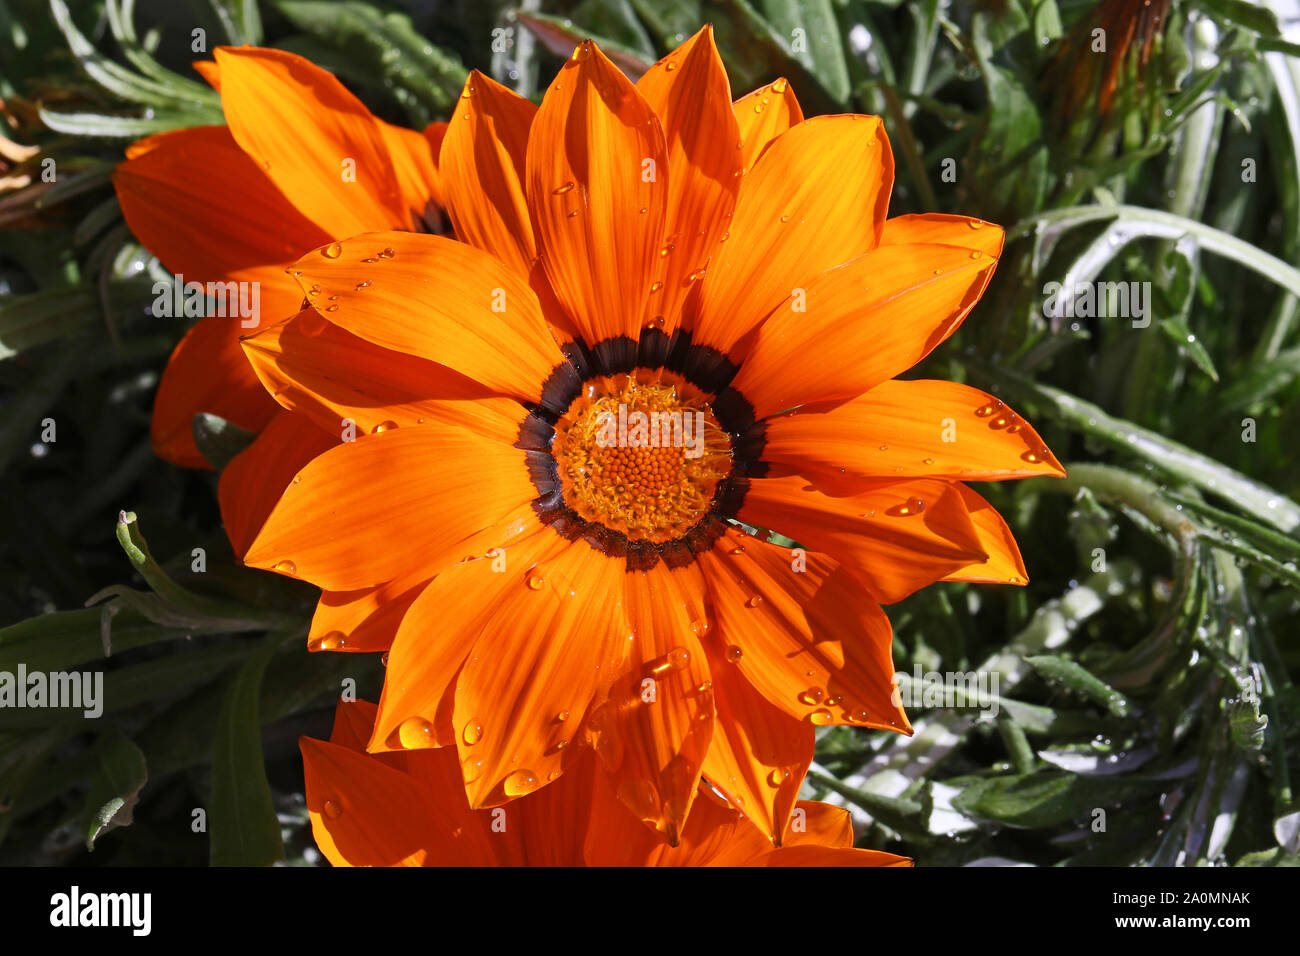 bright orange gazania rigens or splendens variegata compositae asteraceae also known as treasure flower with raindrops blooming in Italy Stock Photo